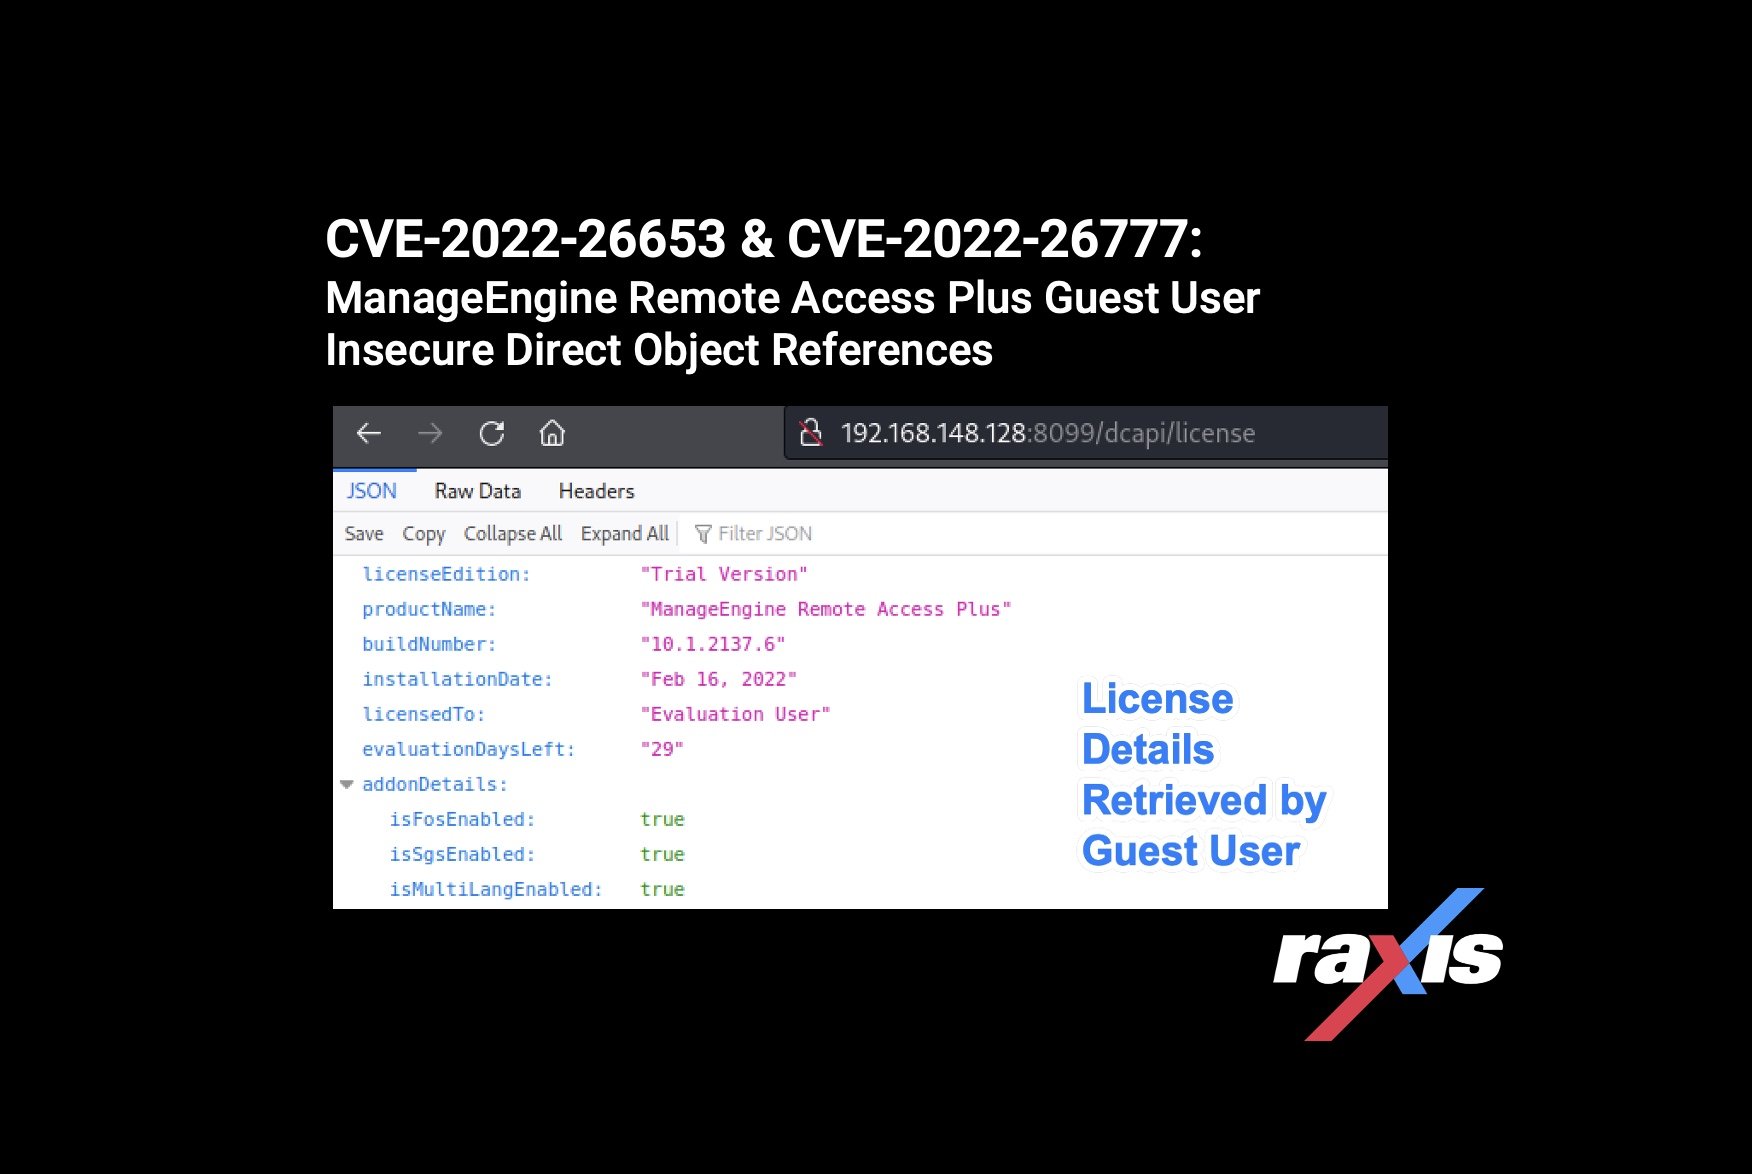 CVE-2022-26653 & CVE-2022-26777: ManageEngine Remote Access Plus Guest User Insecure Direct Object References